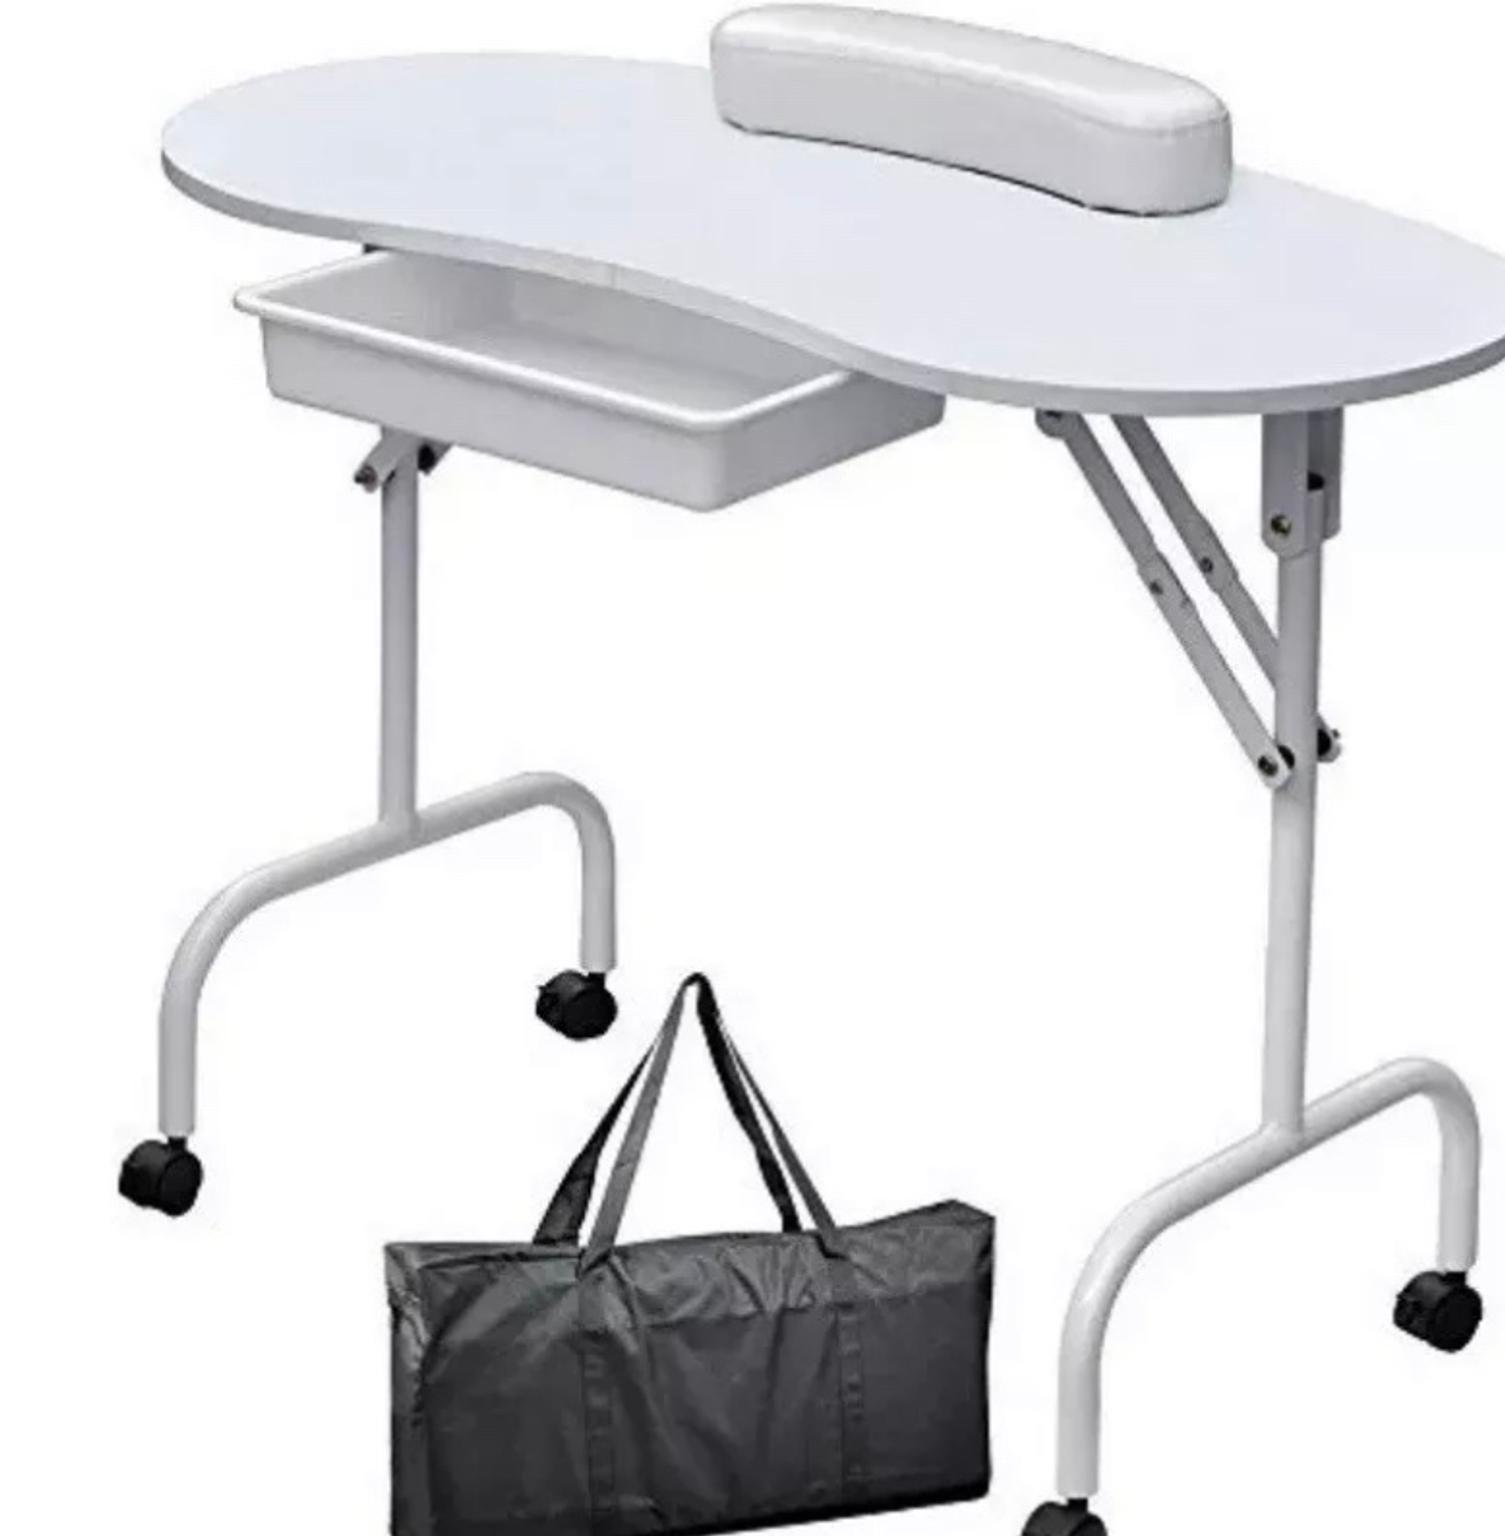 Portable Manicure Table in N22 London for £32.00 for sale